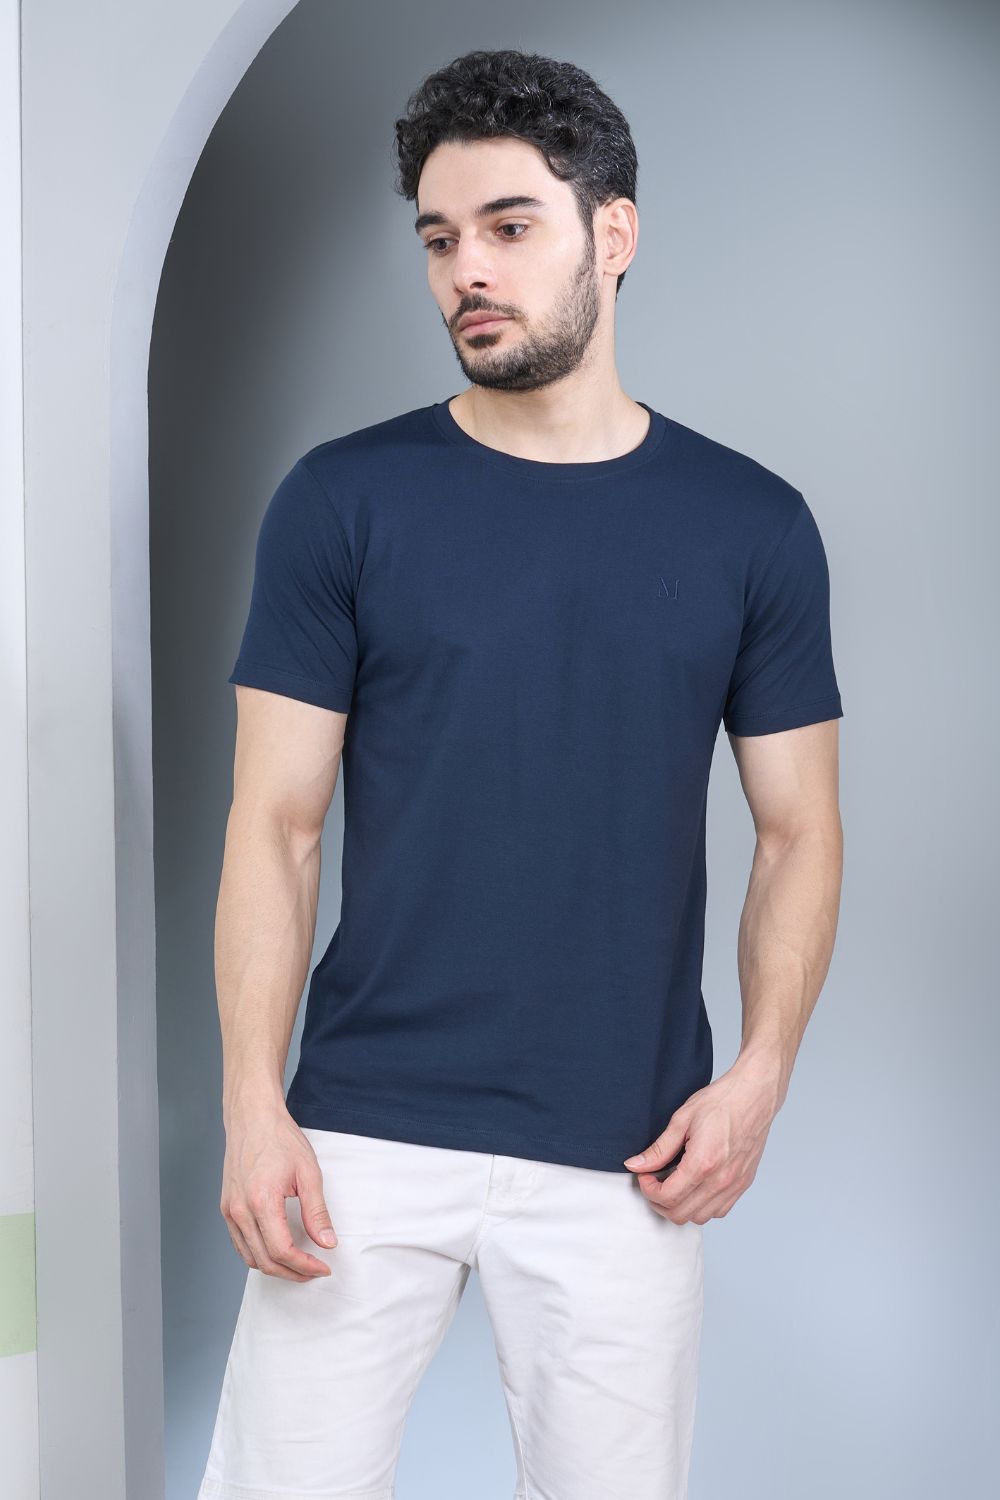 Teal Navy colored, solid t shirt for men with round neck and half sleeves, front view.